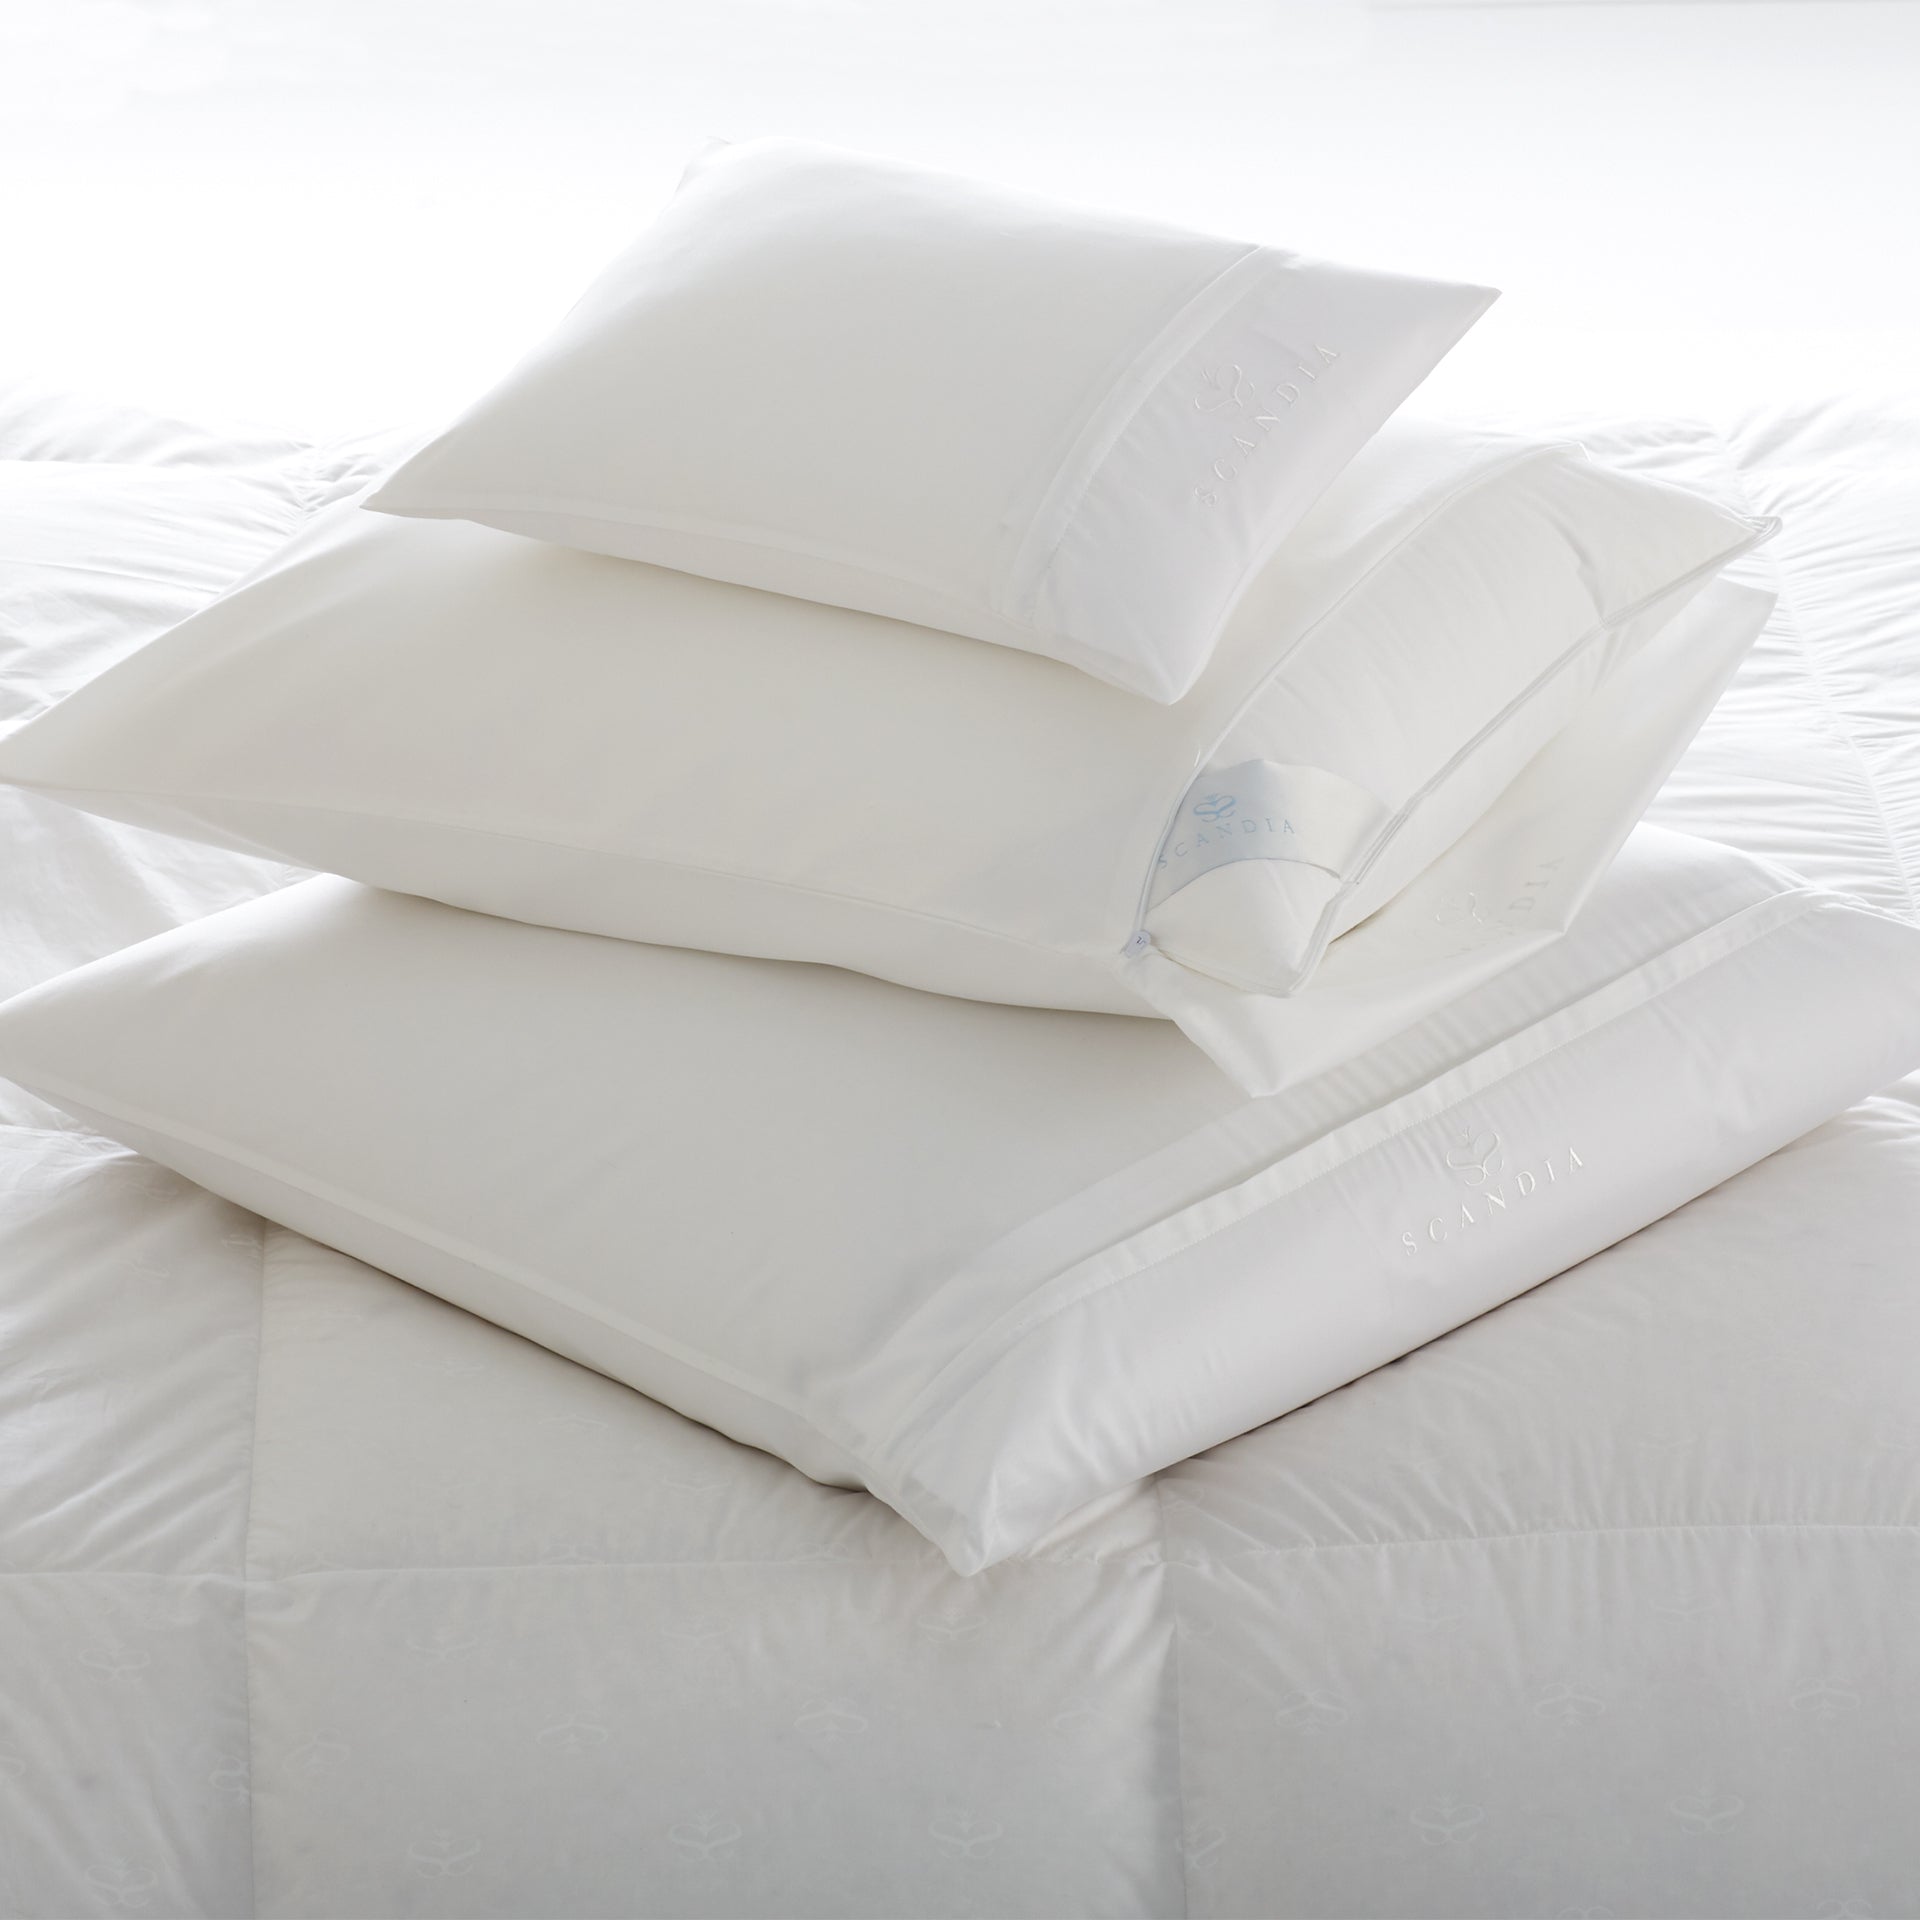 Stacked Scandia pillows covered with our 350 sateen pillow protector covers